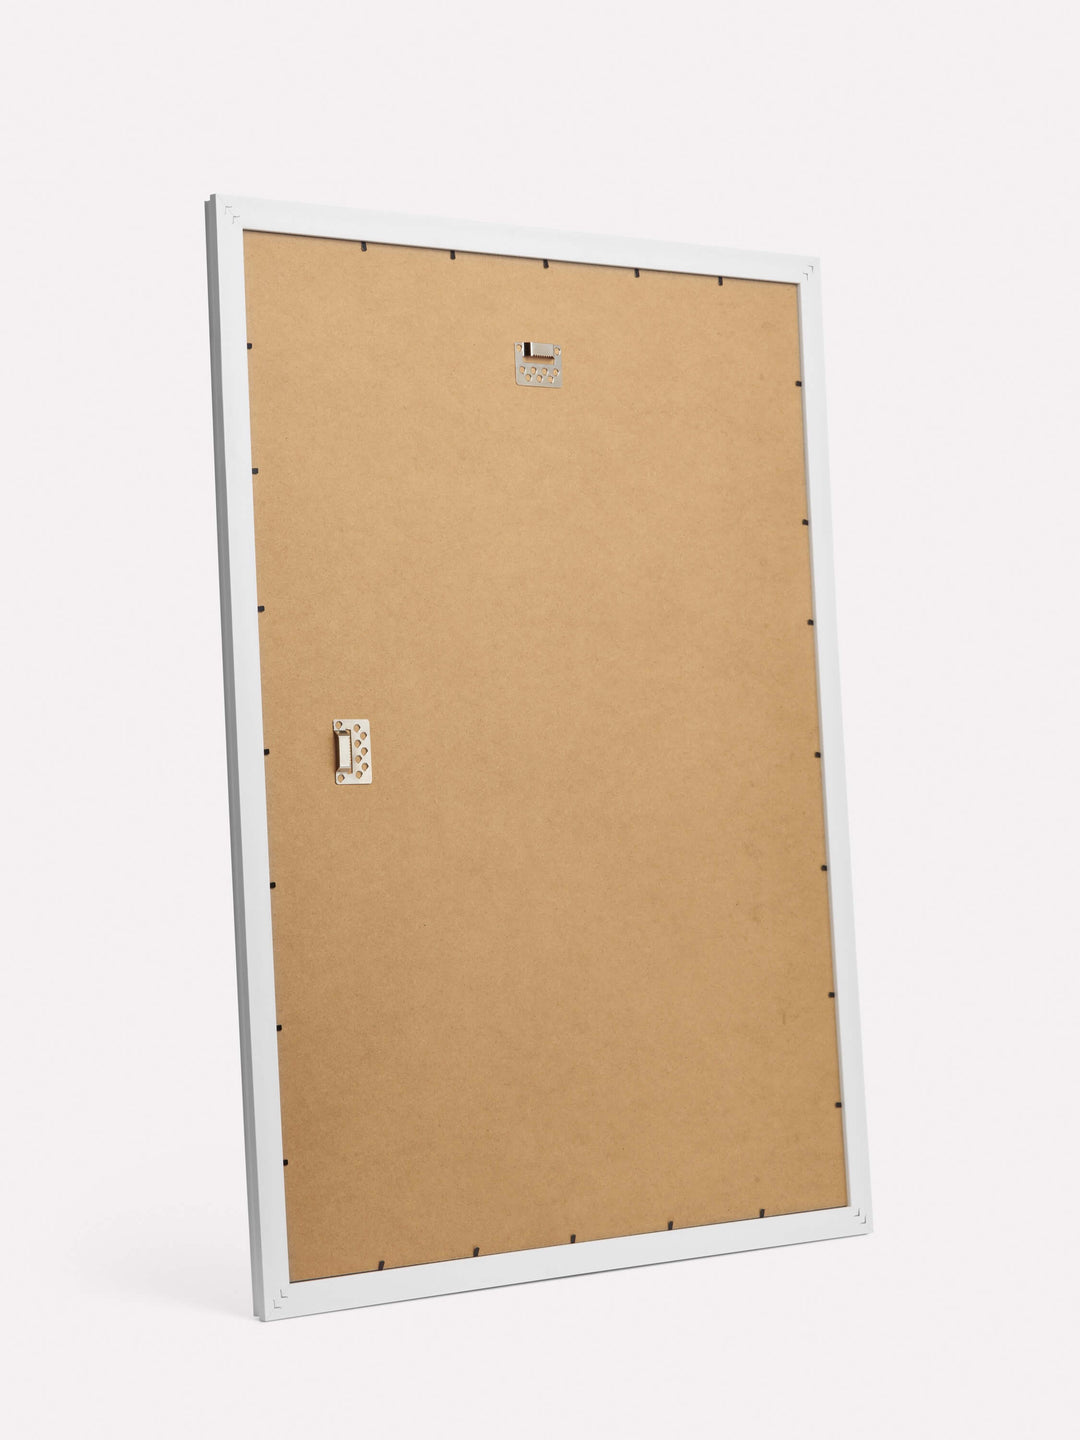 30x40-inch Decorative Frame, White - Back view